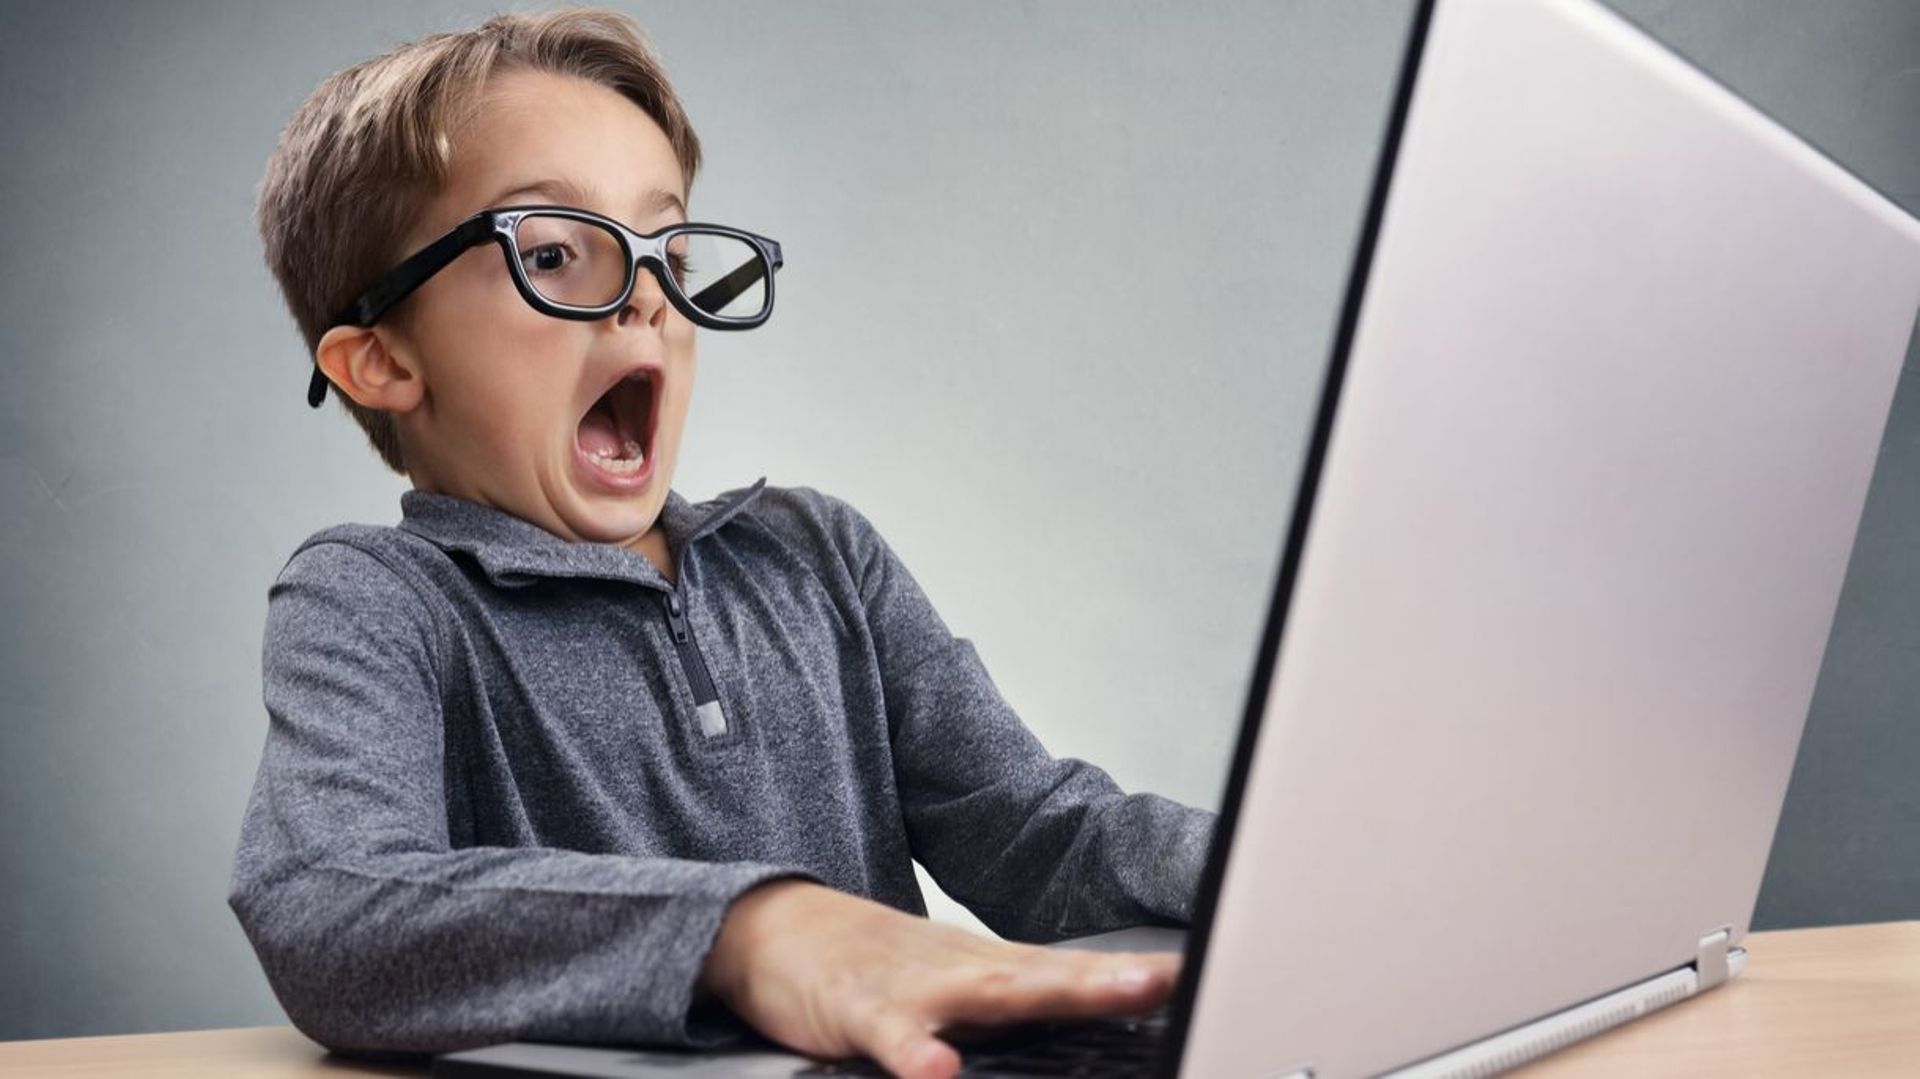 Shocked and surprised boy on the internet with laptop computer